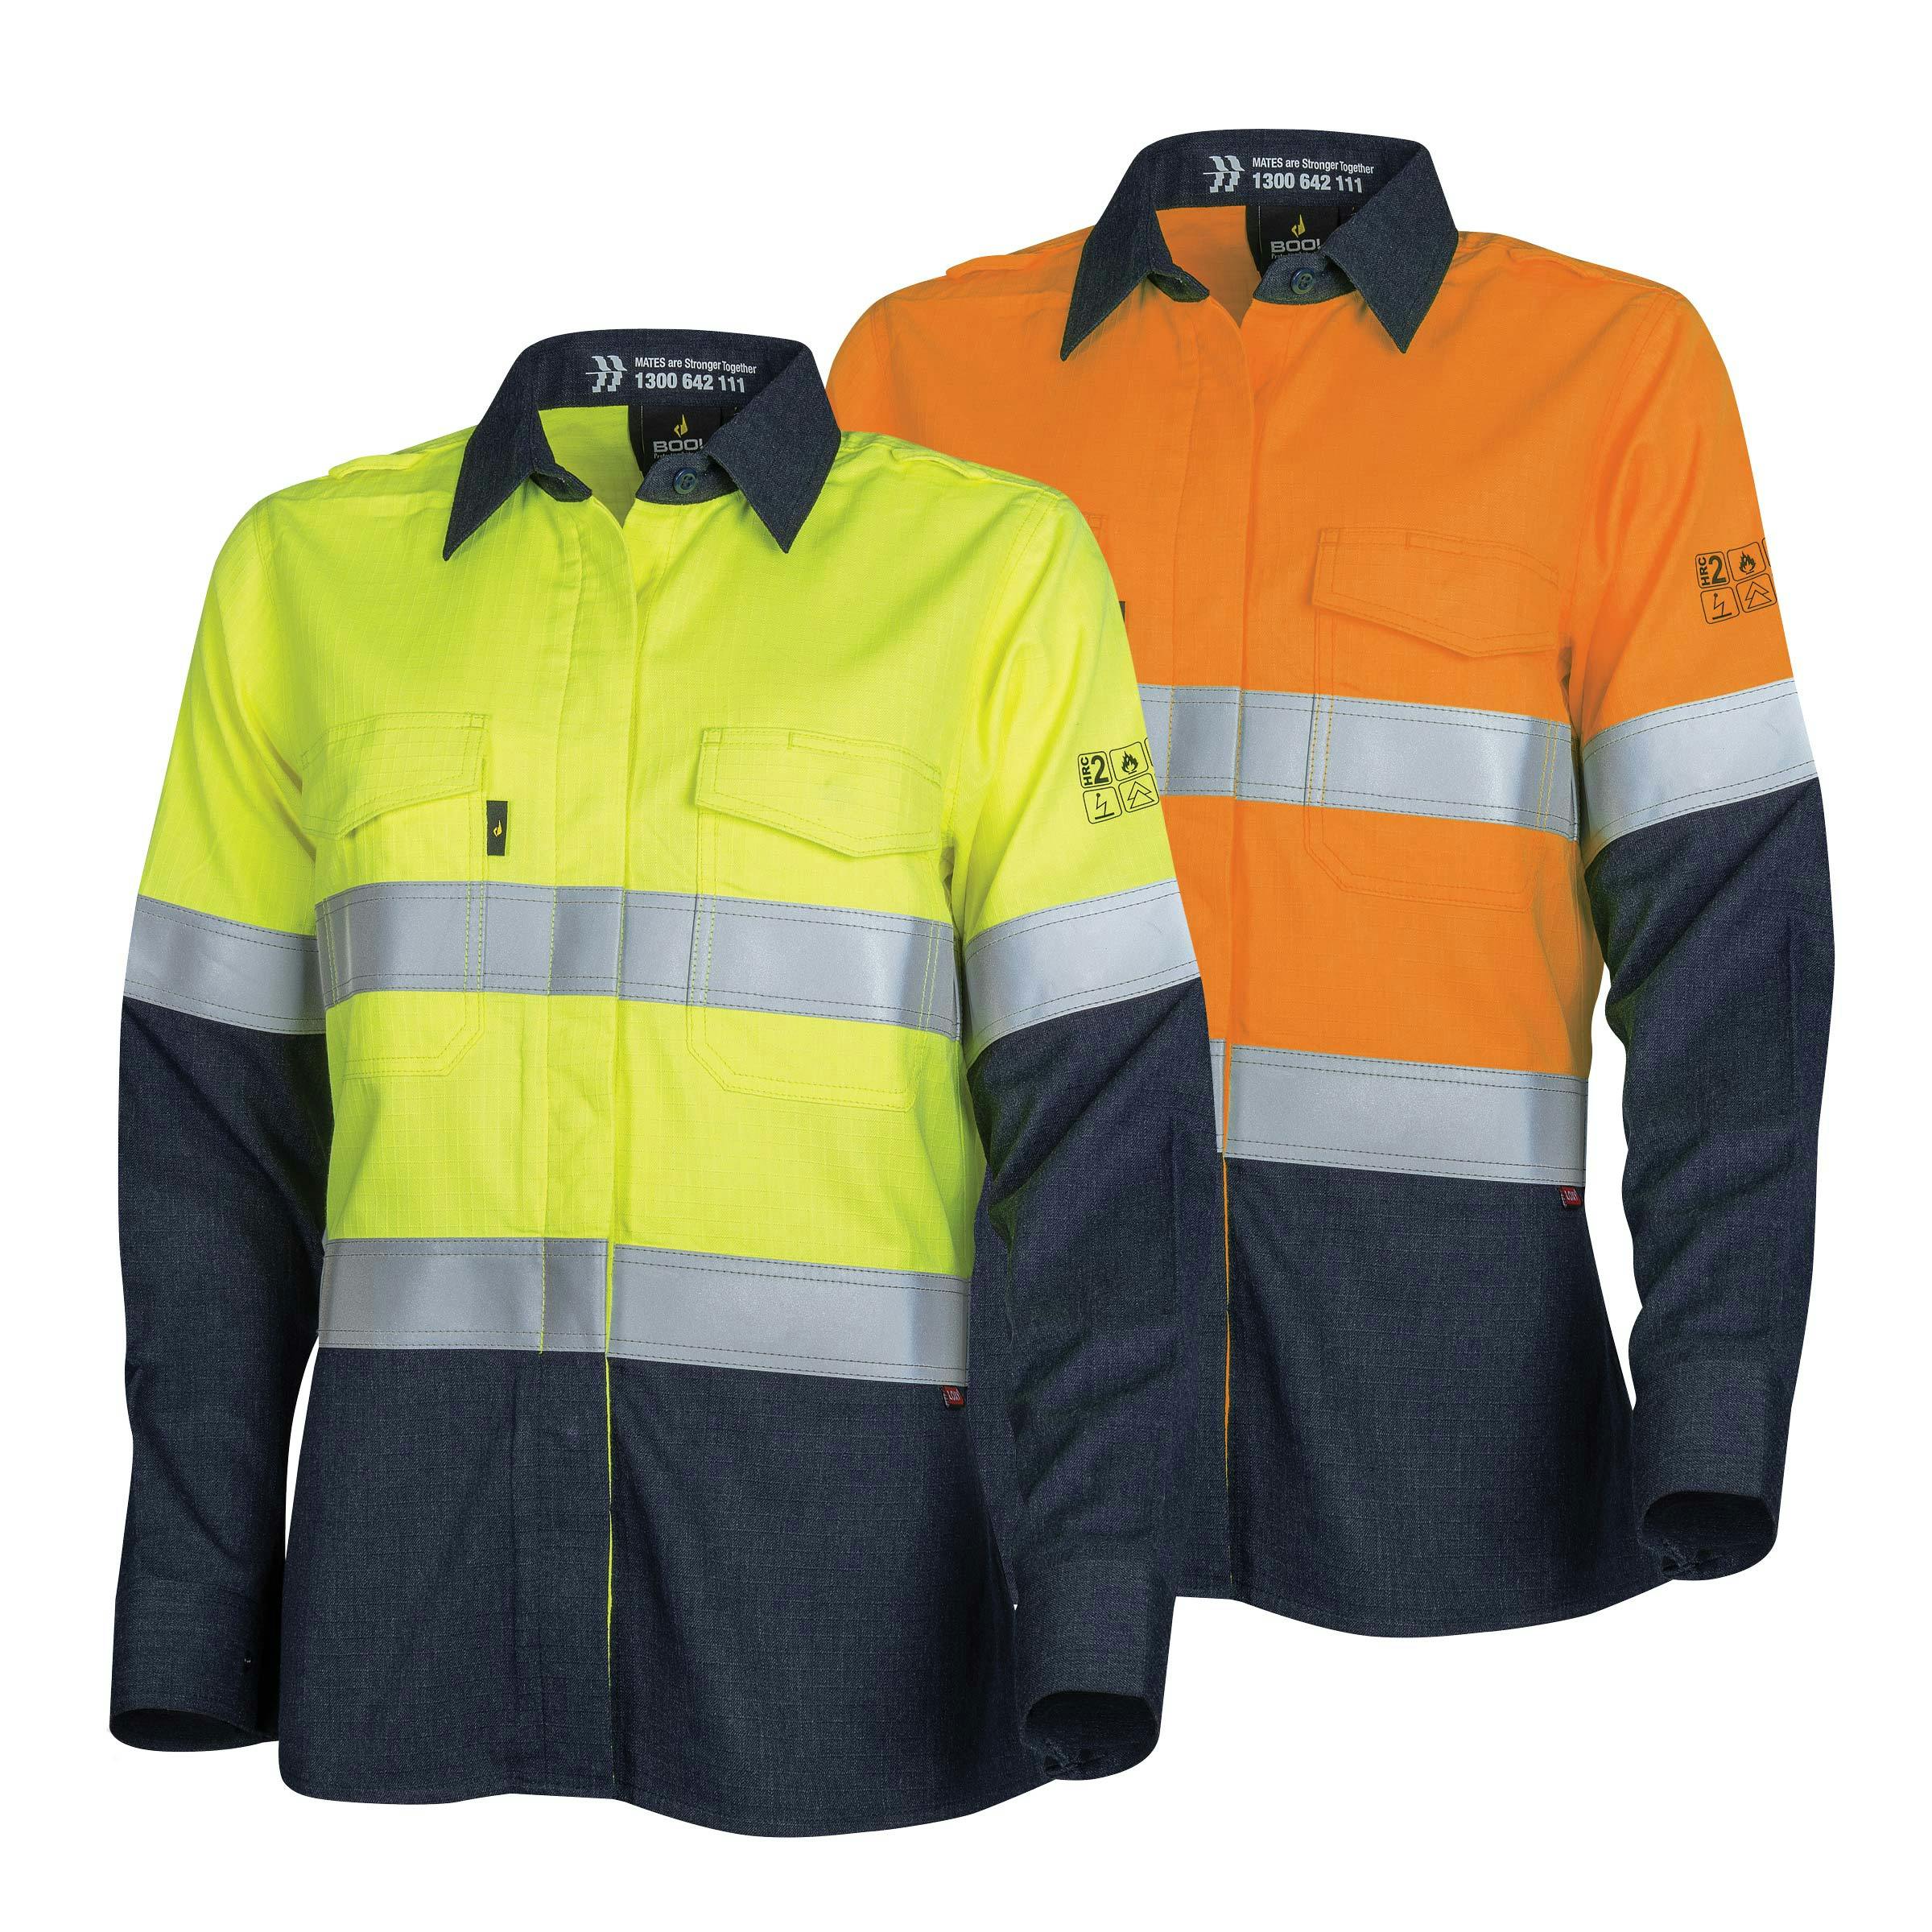 Bool PT Shirt Ladies 197gsm Parvotex 2.0 L/S Two Tone Fire Retardent With Loxy FR 9801 Two Hoop Reflective Tape